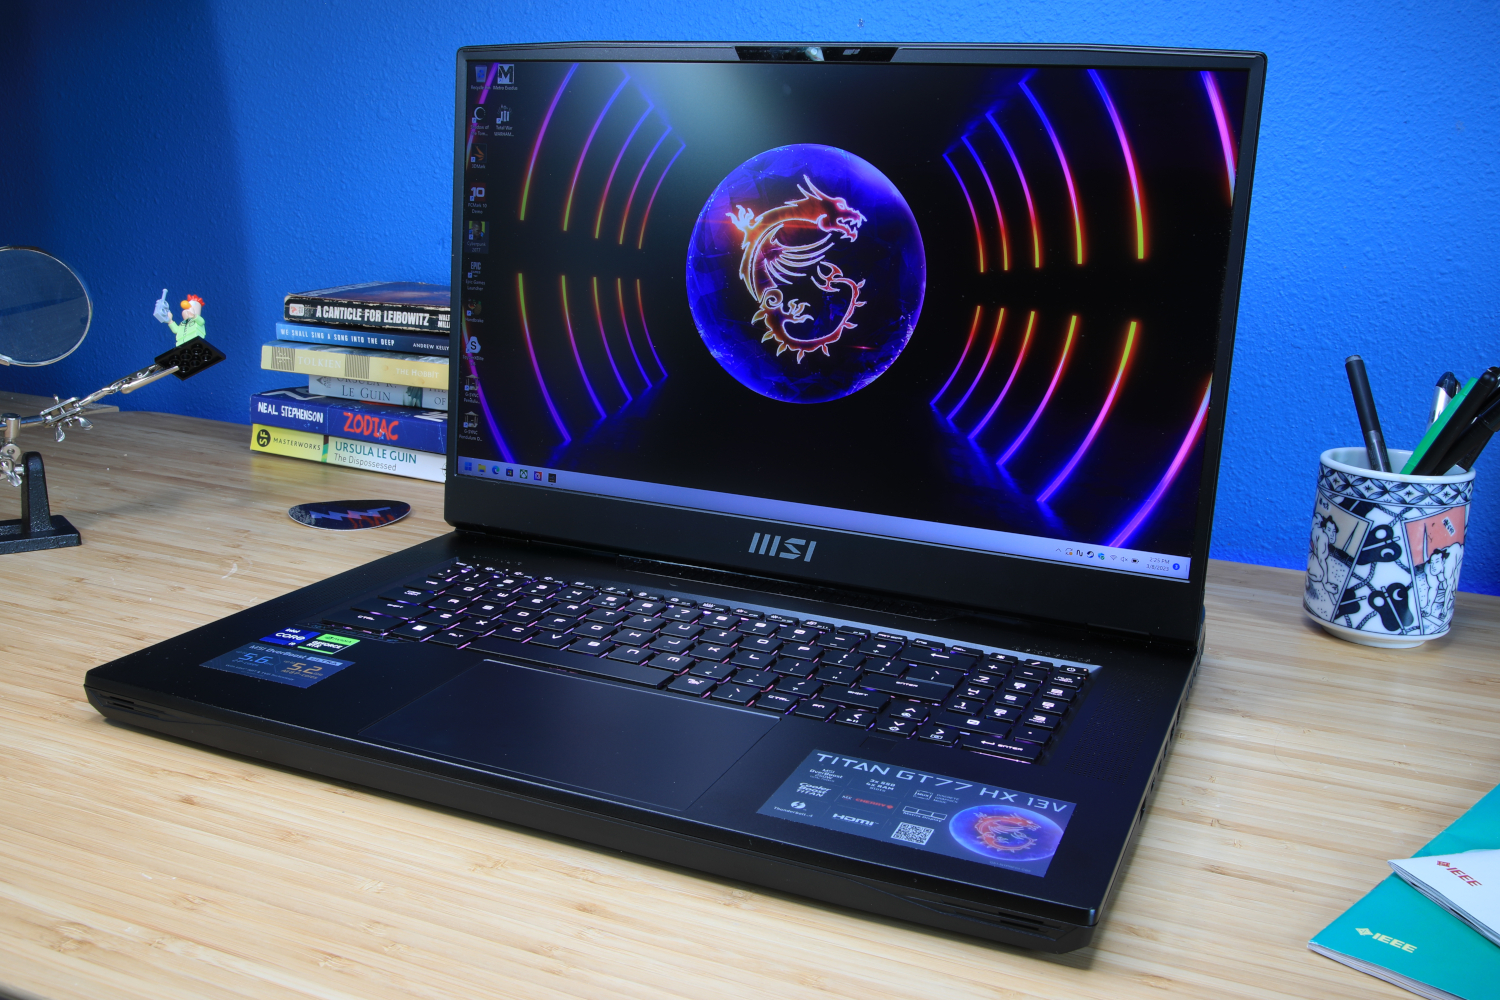 MSI Titan GT77 HX 13V - Best high-end laptop for video editing